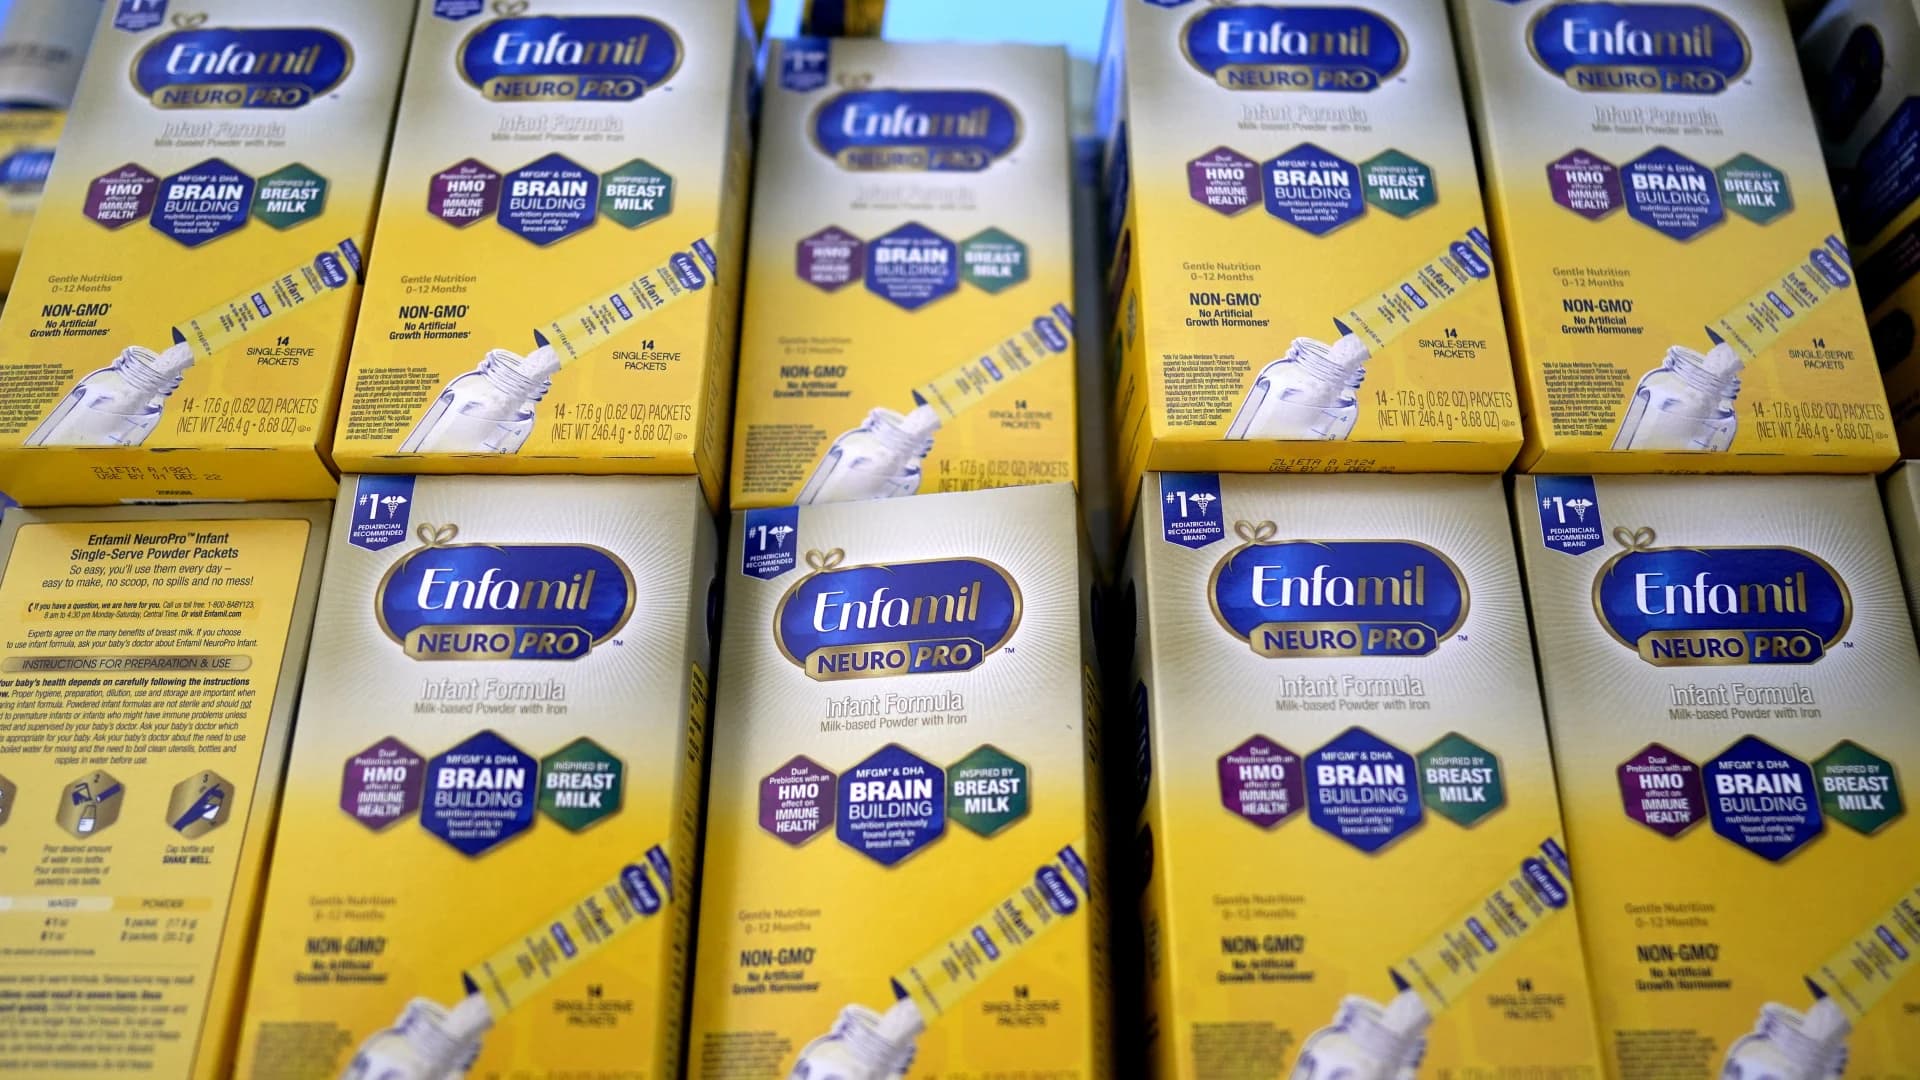 FDA head: Baby formula factory could reopen by next week